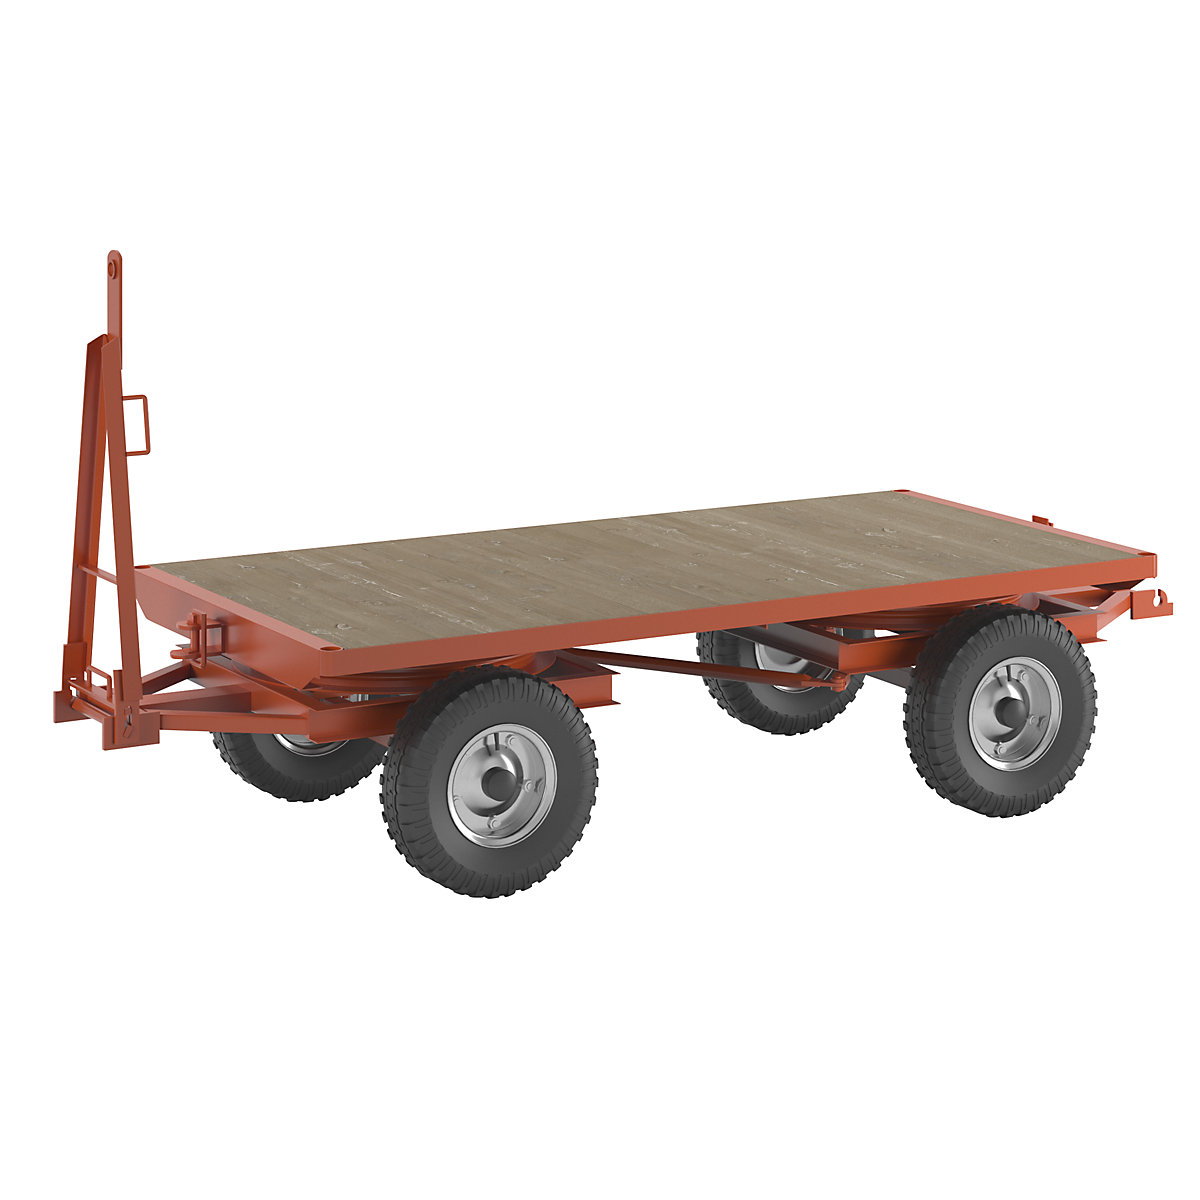 Trailer, 4-wheel double turntable steering, max. load 5 t, platform 2.5 x 1.25 m, pneumatic tyres-4